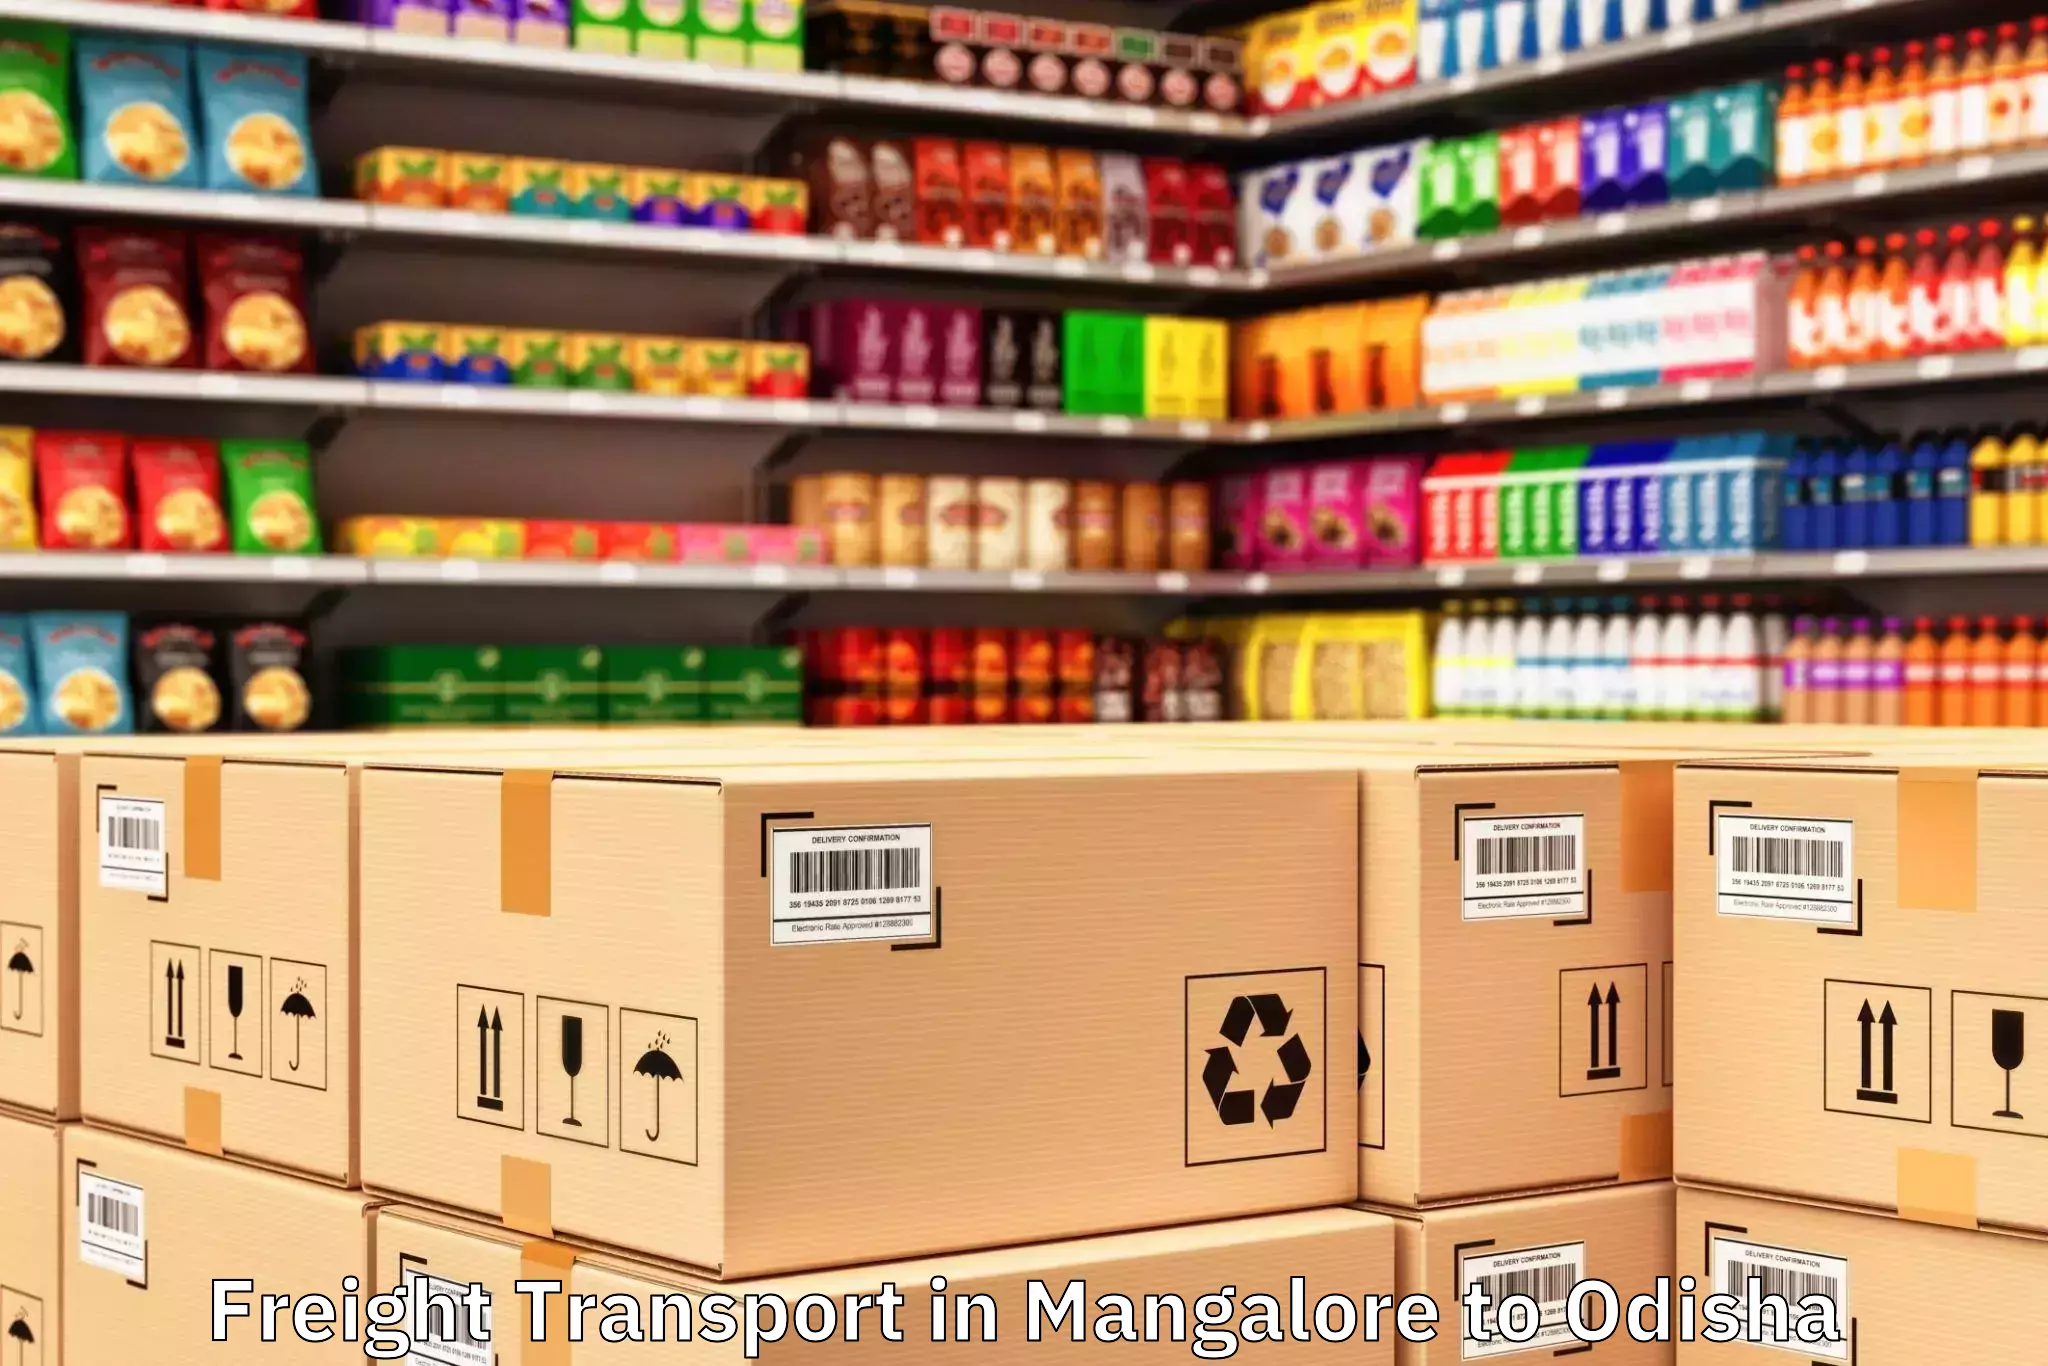 Quality Mangalore to Muribahal Freight Transport